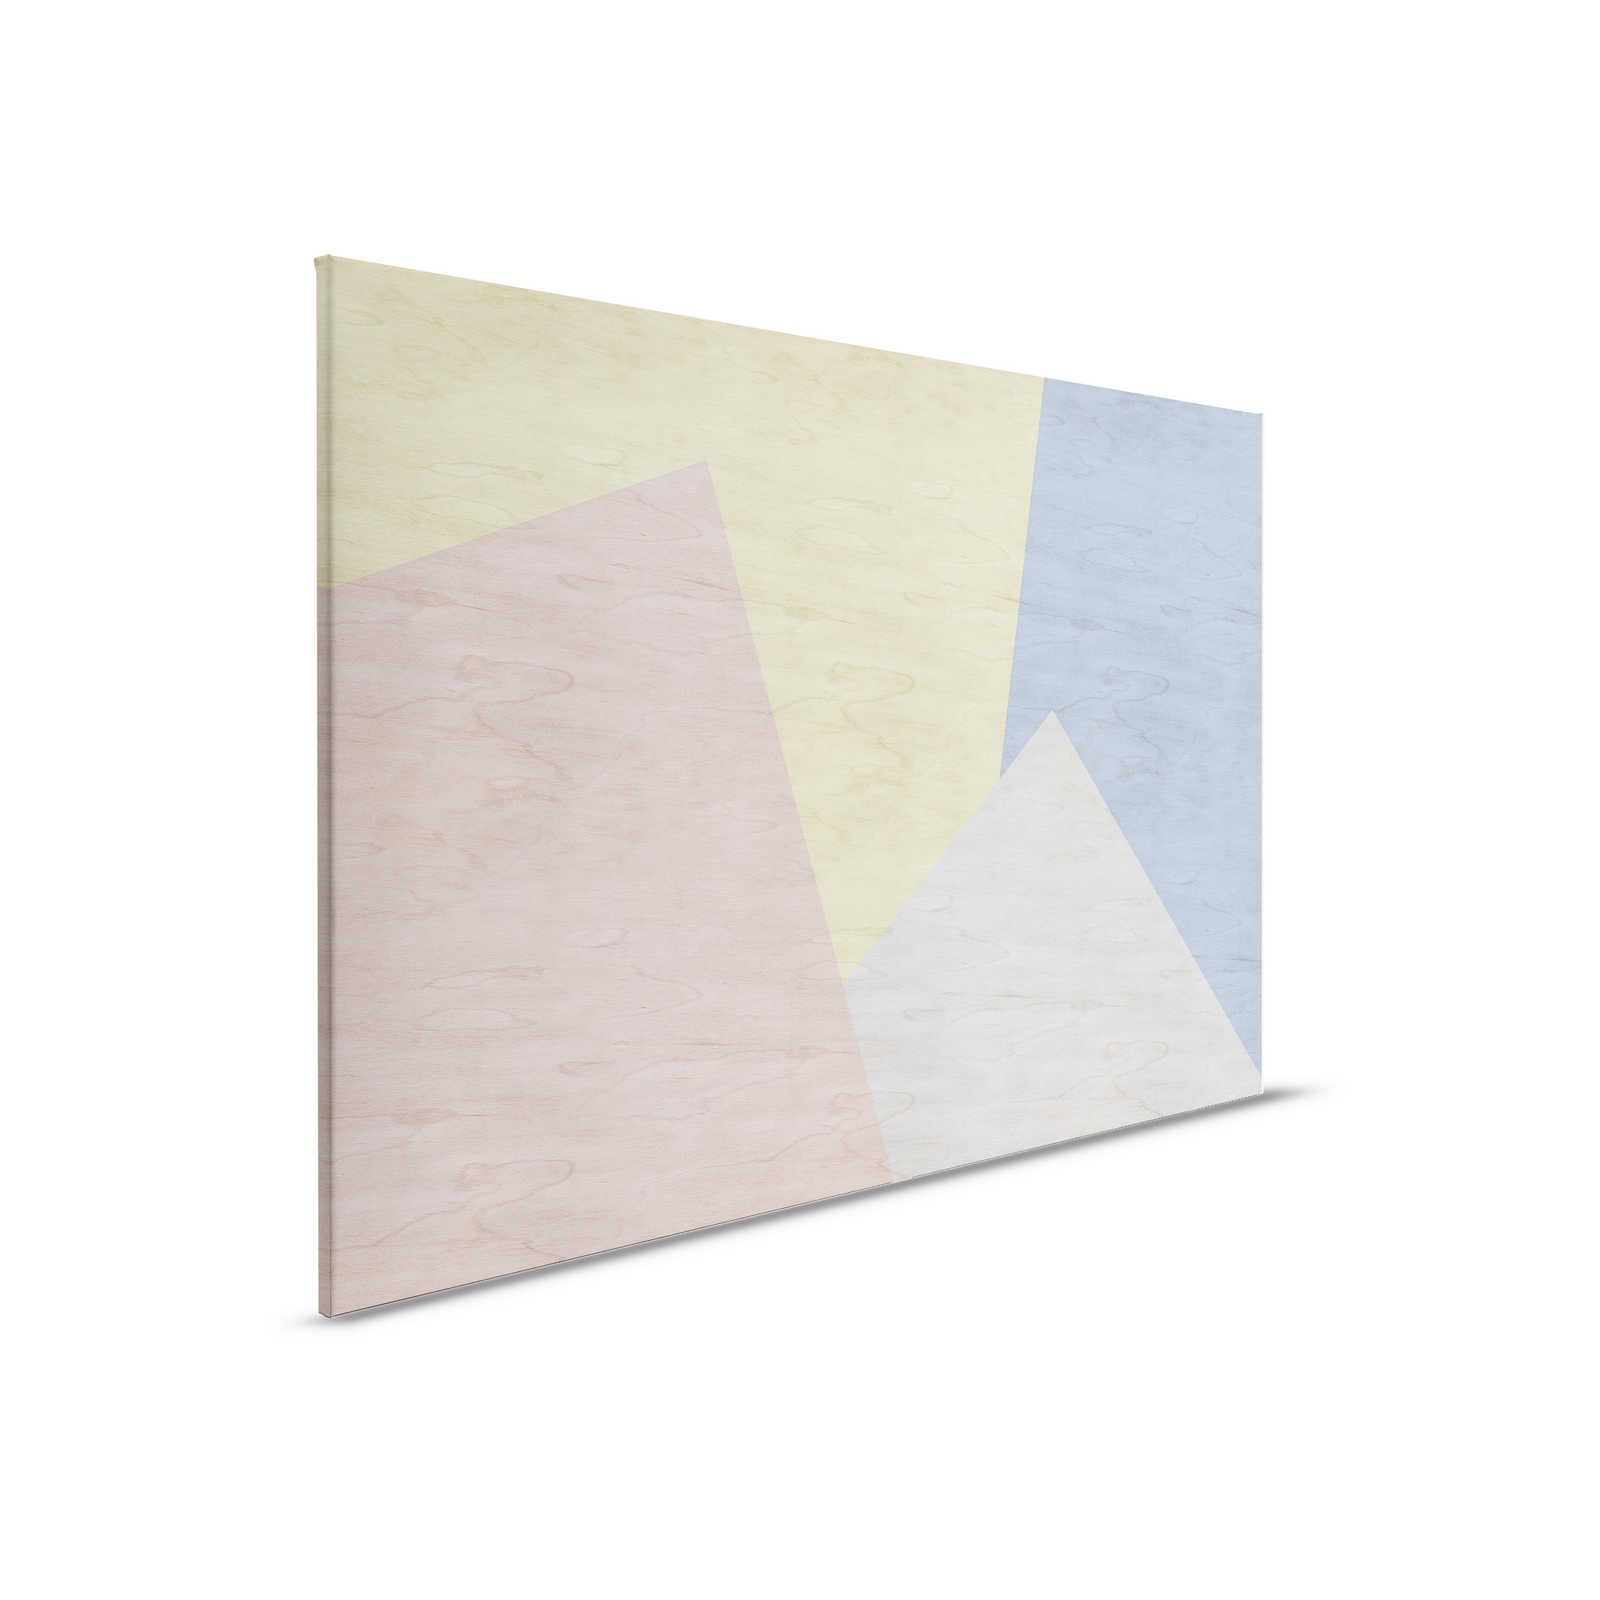         Inaly 3 - Abstract Colourful Canvas Painting - Plywood Optics - 0.90 m x 0.60 m
    